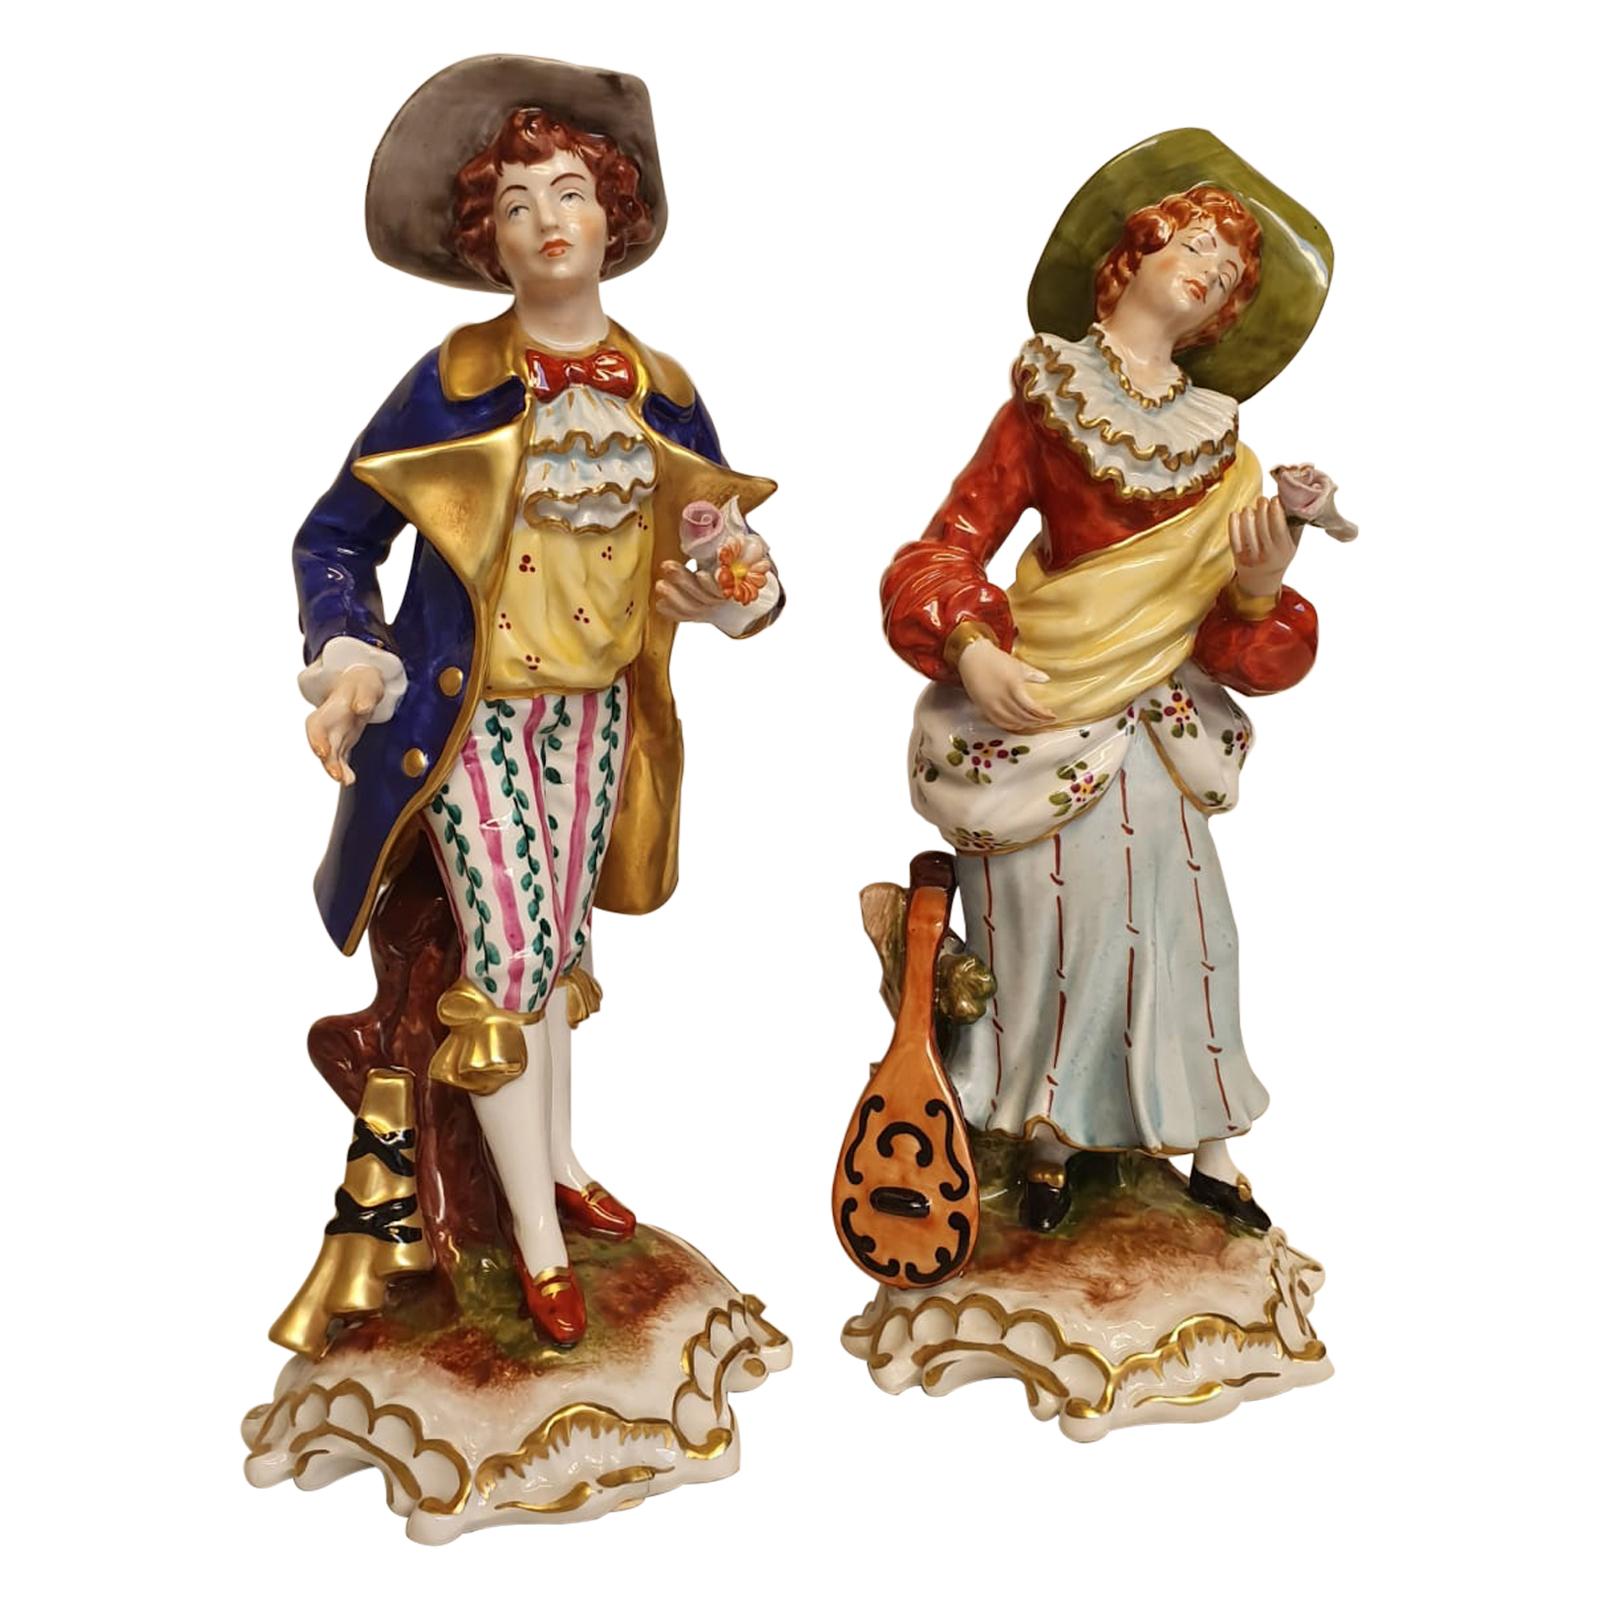 18th Century Style Capo Di Monte Porcelain Figure "Woman with Mandolino and Man" For Sale